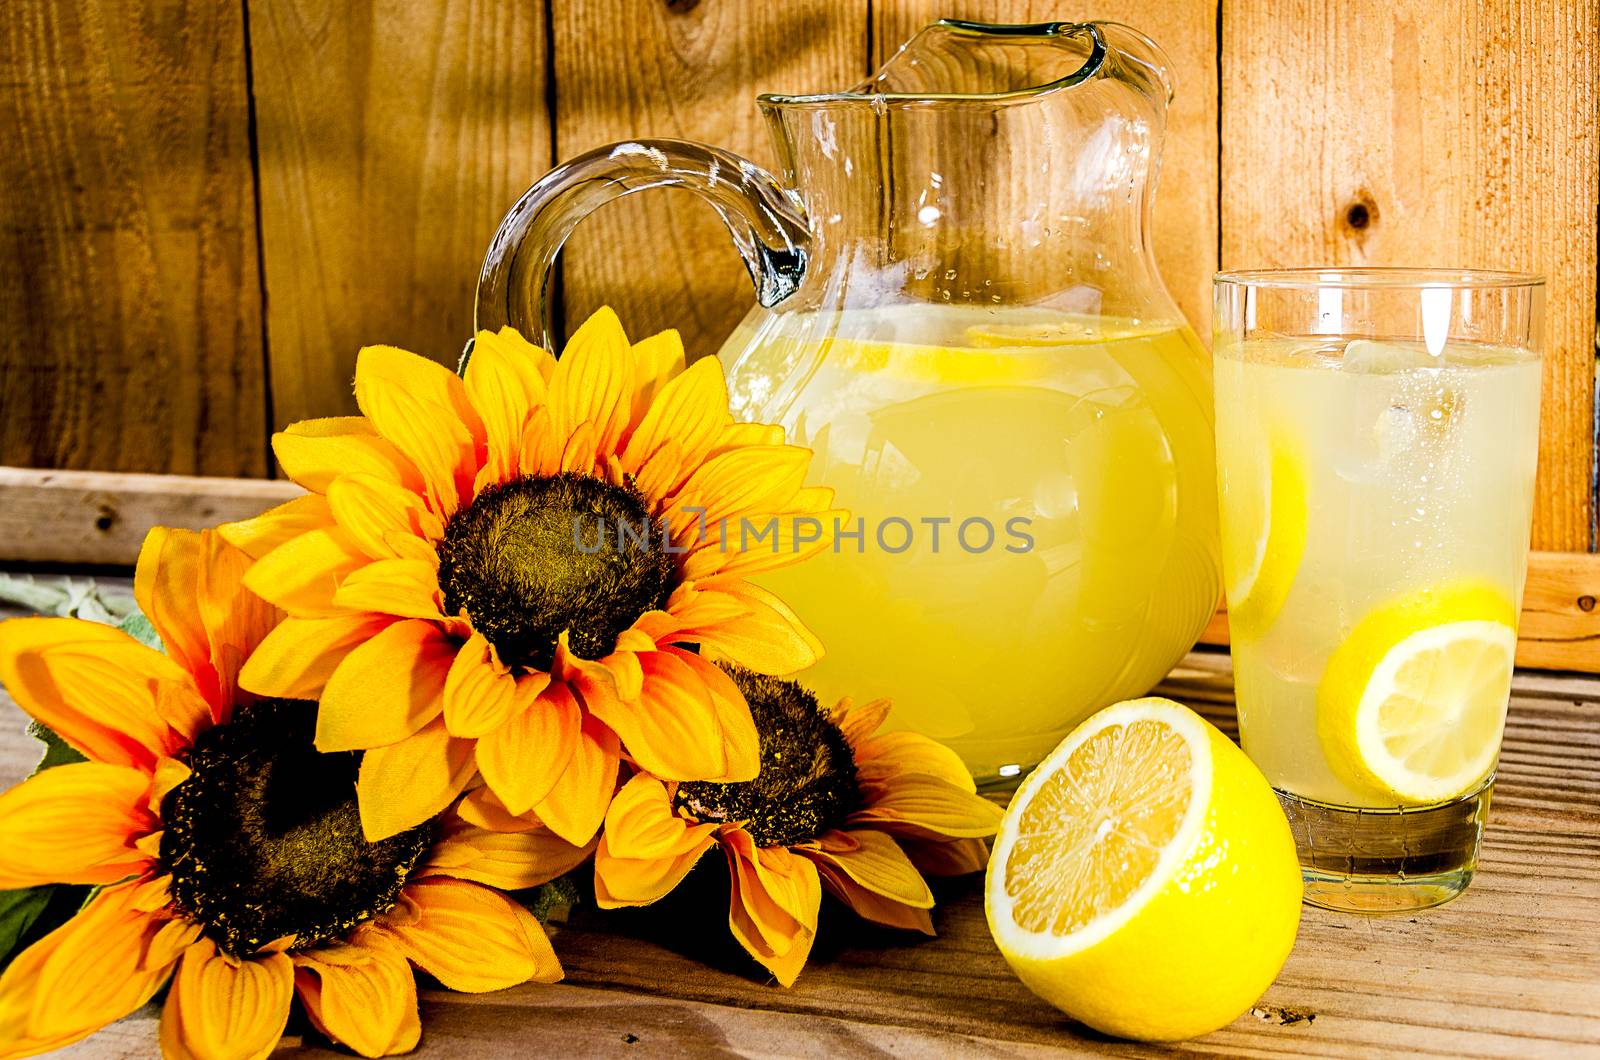 Summer lemonade with lemon slices, pitcher, and sunflowers on wood bench.  